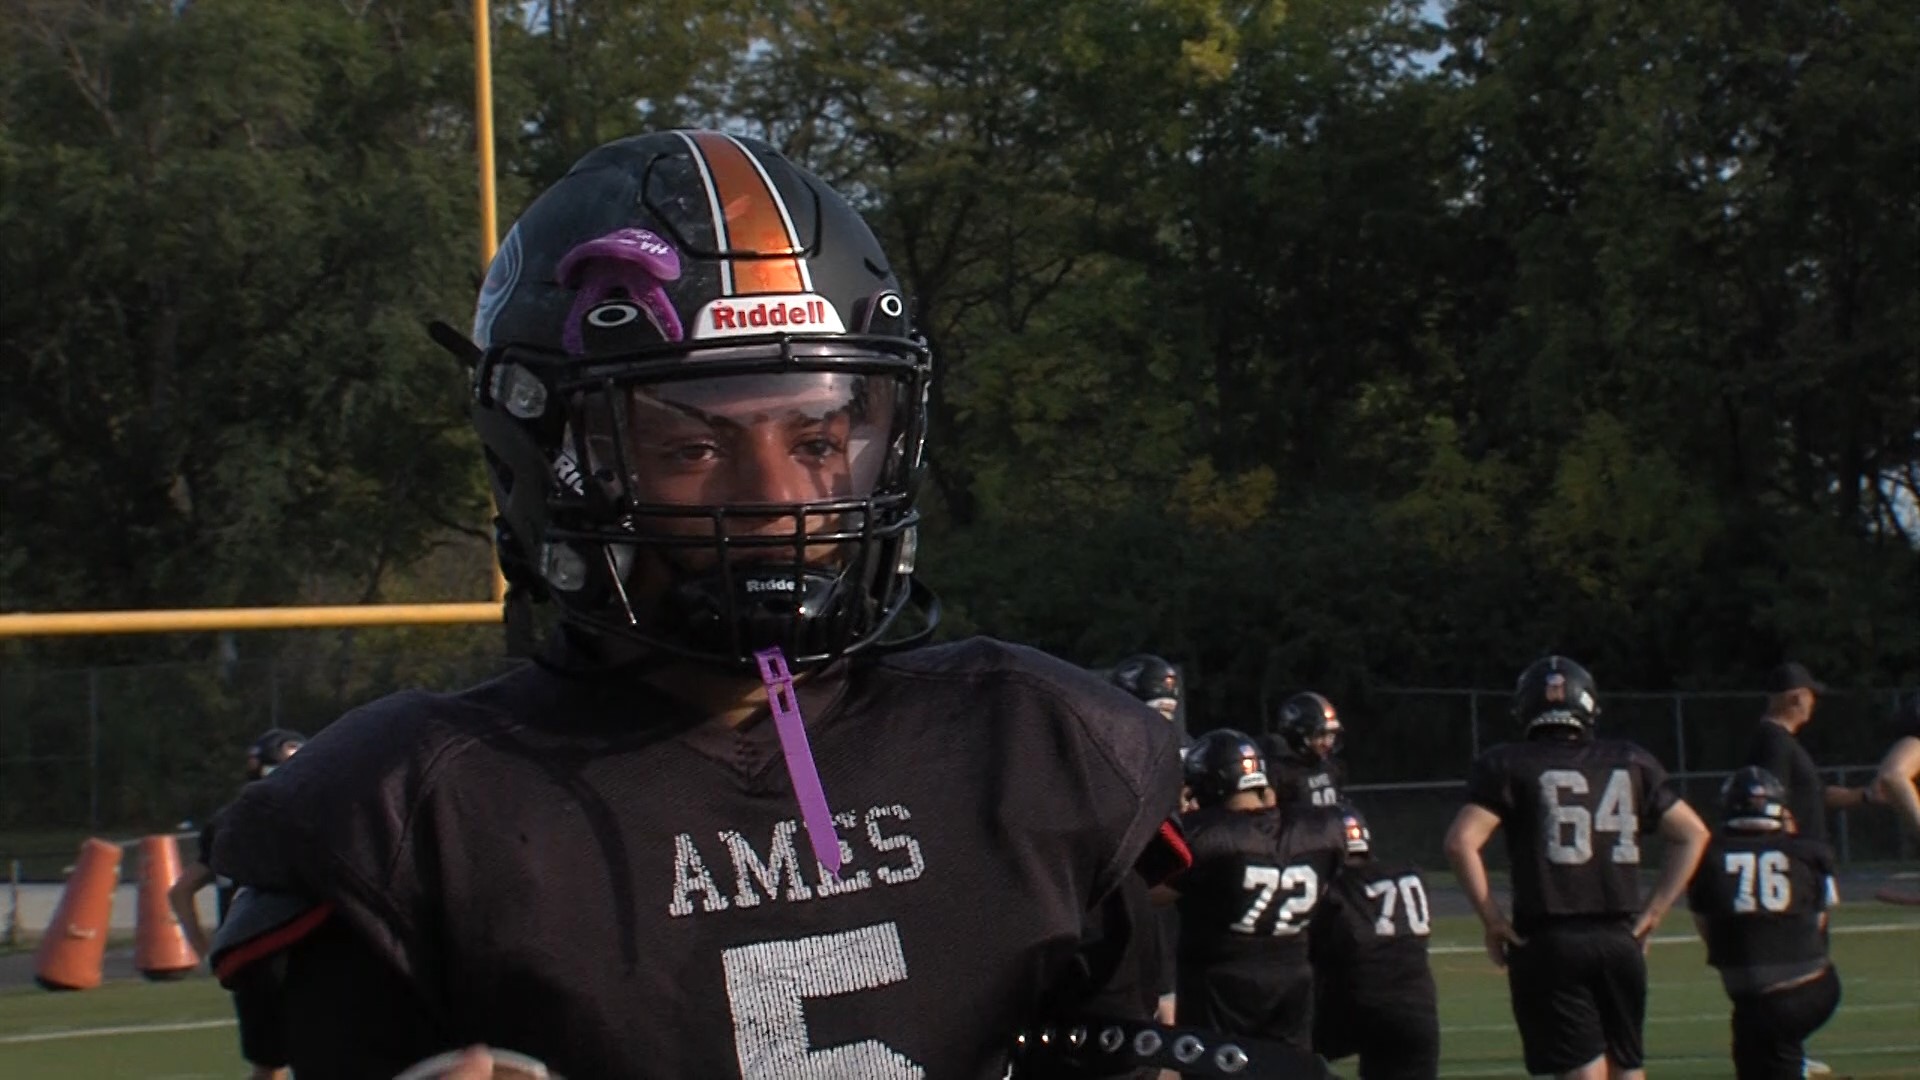 Ames football hasn't won state since 2015, but this season, they are 5-1. That can be attributed to the explosive offense led by Dallas Sauser and Jalen Lueth.